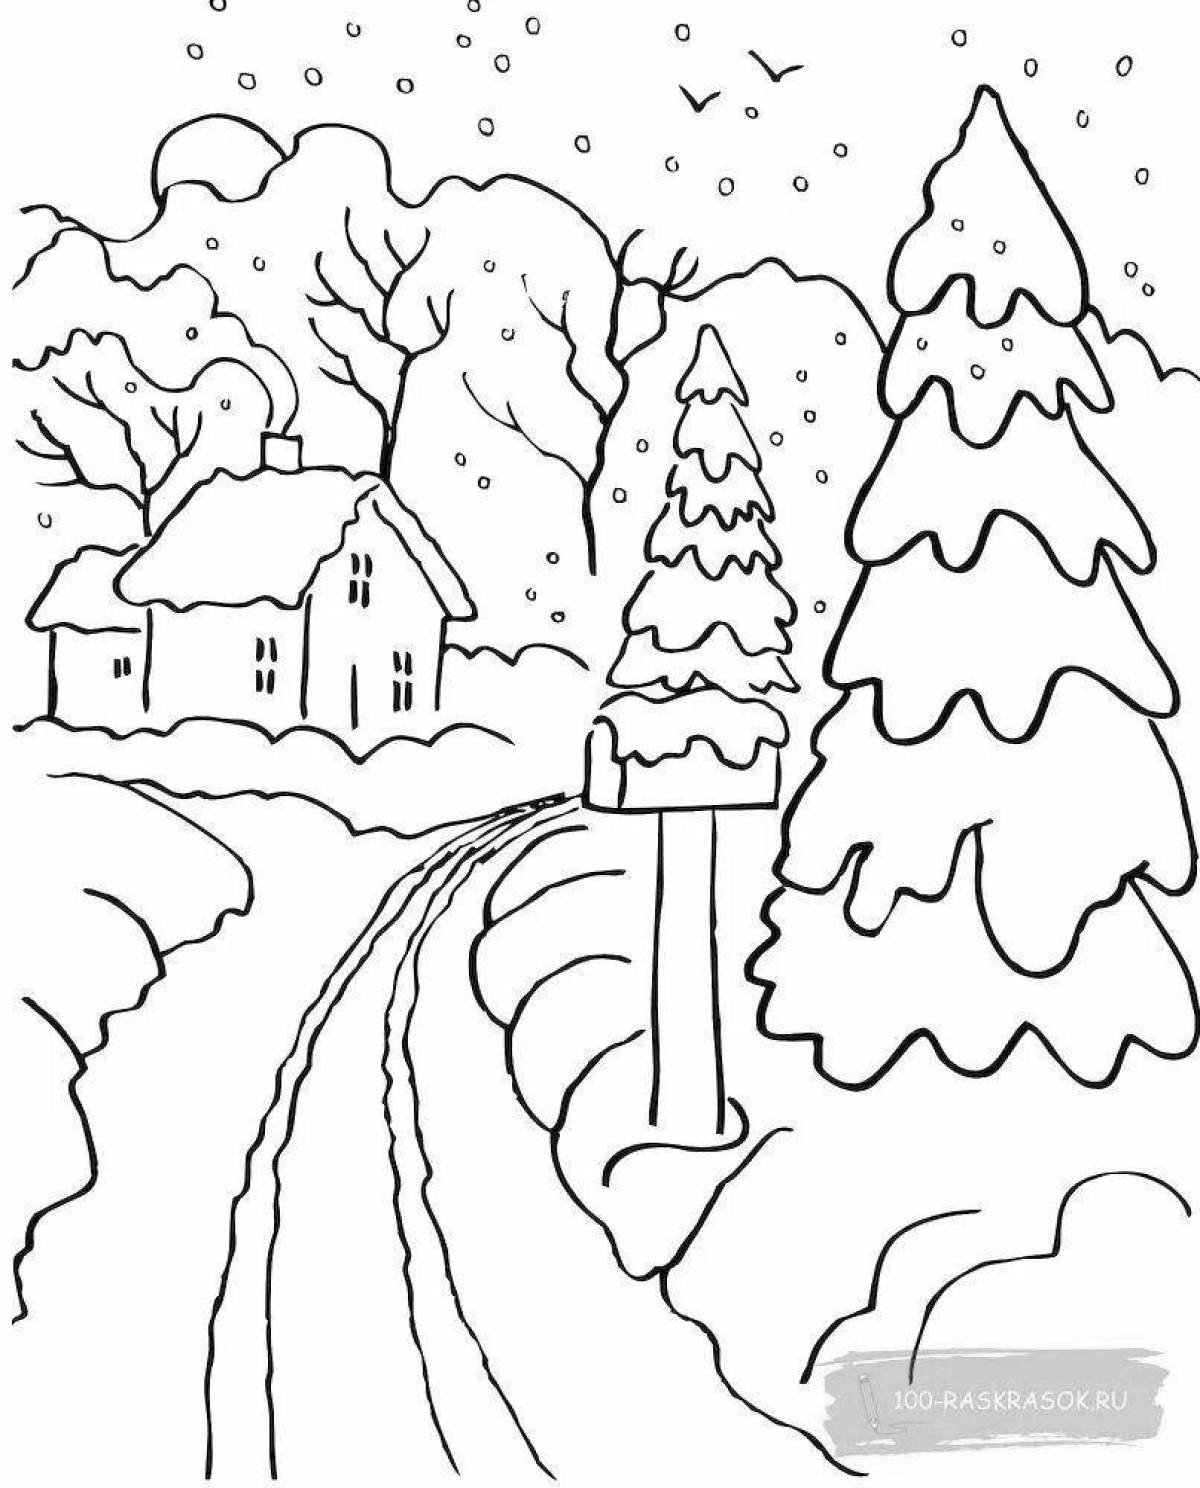 Great winter nature coloring book for kids